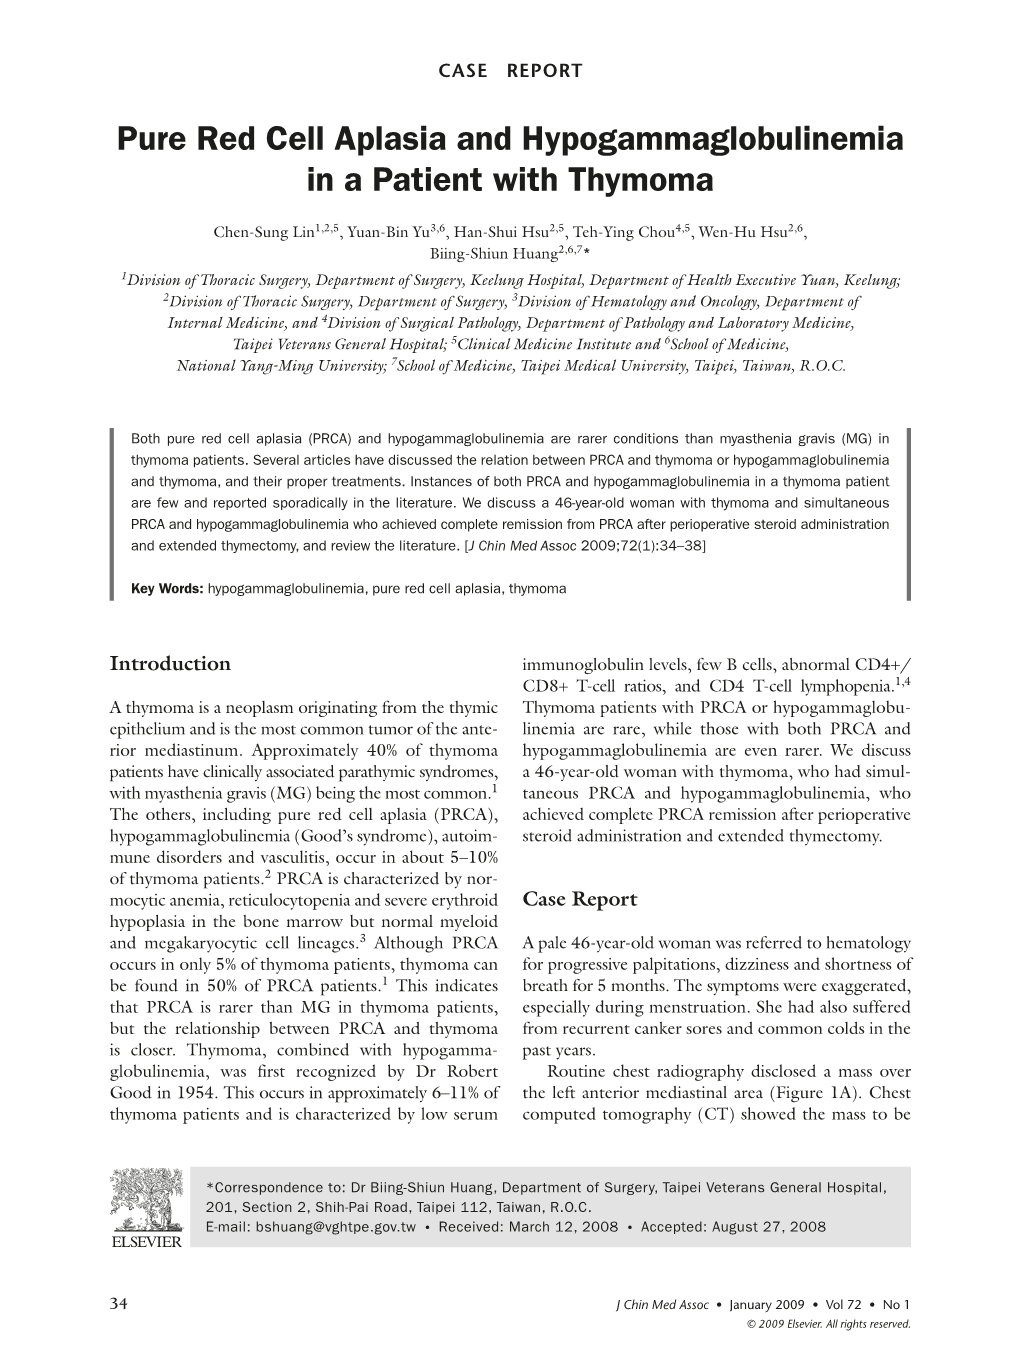 Pure Red Cell Aplasia and Hypogammaglobulinemia in a Patient with Thymoma